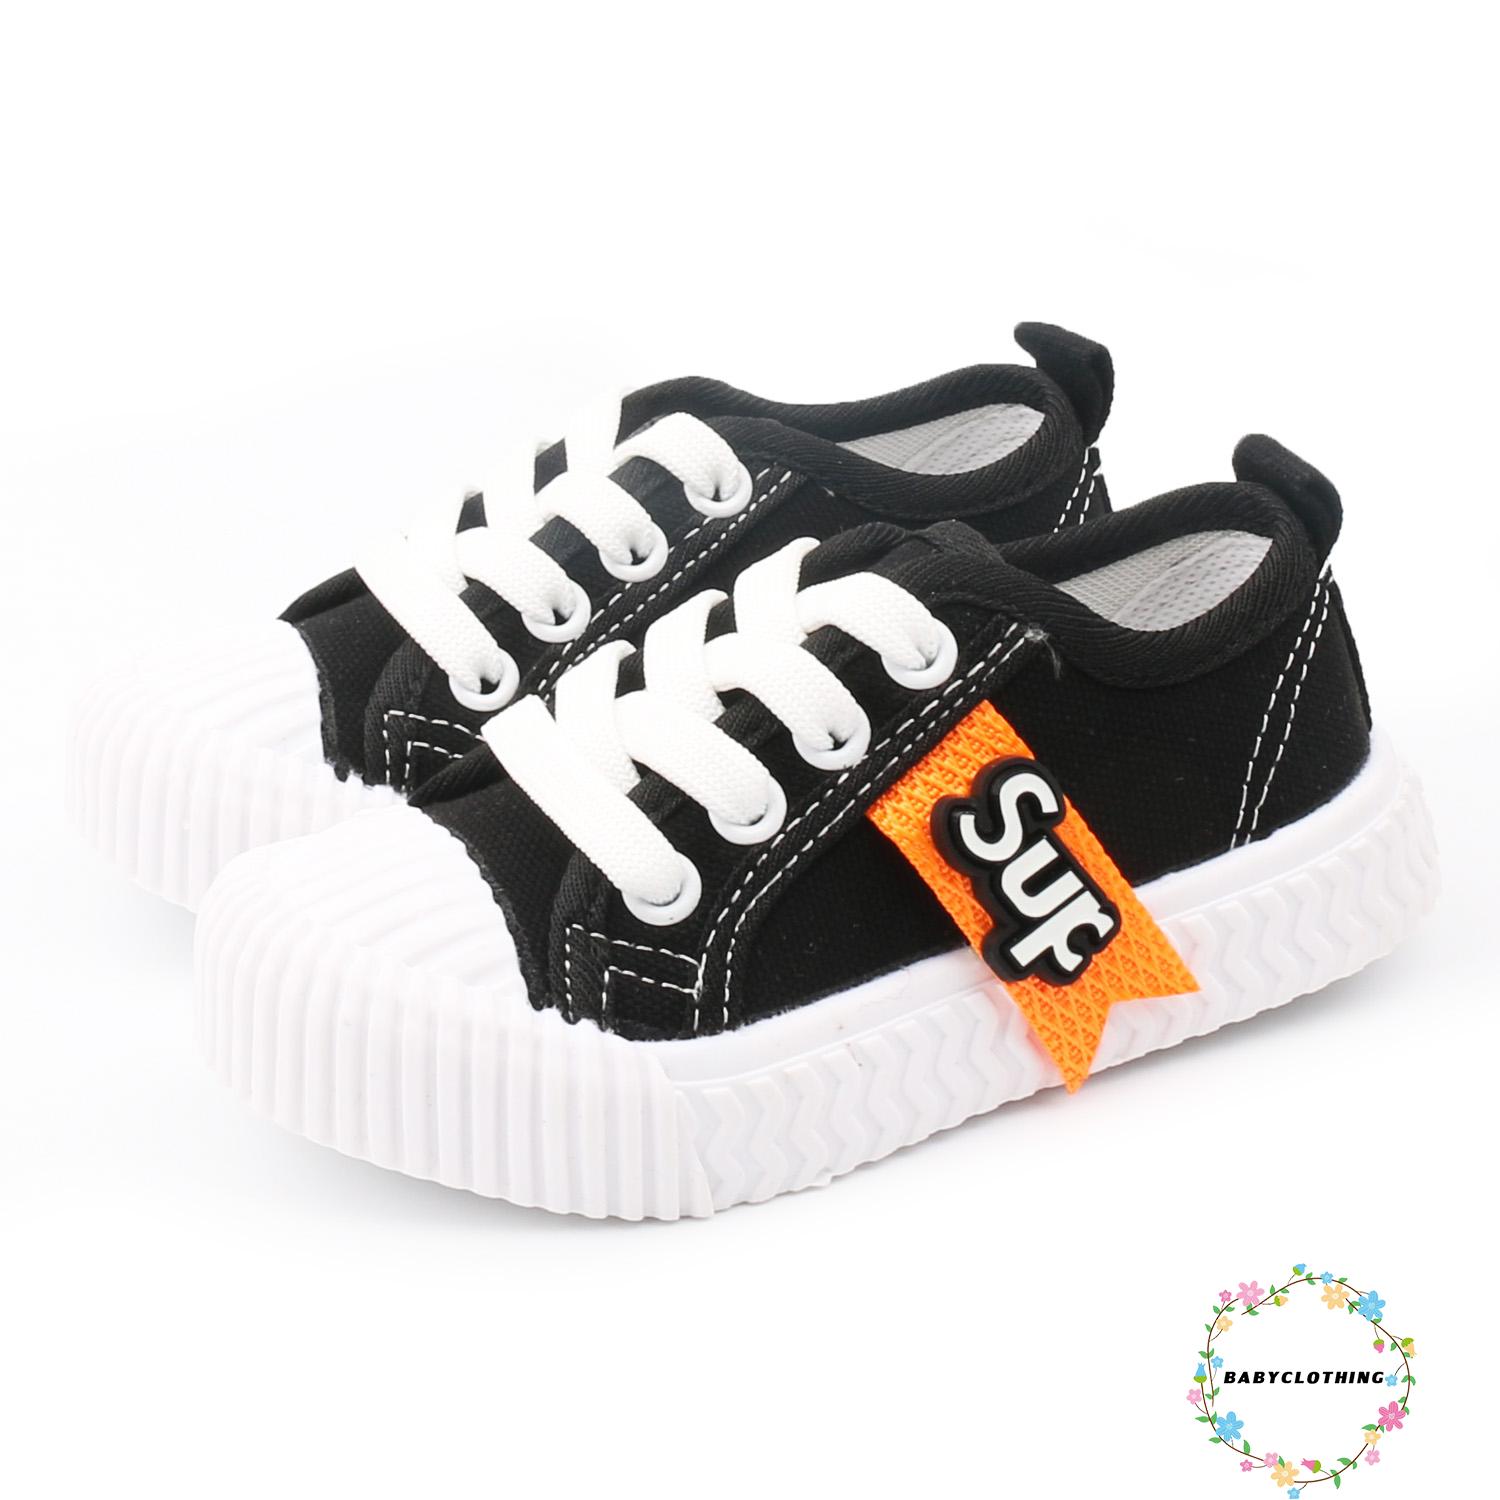 BBCQ-Kids Canvas Shoes Non-slip Sneakers Comfortable Casual Shoes for Toddler School Running